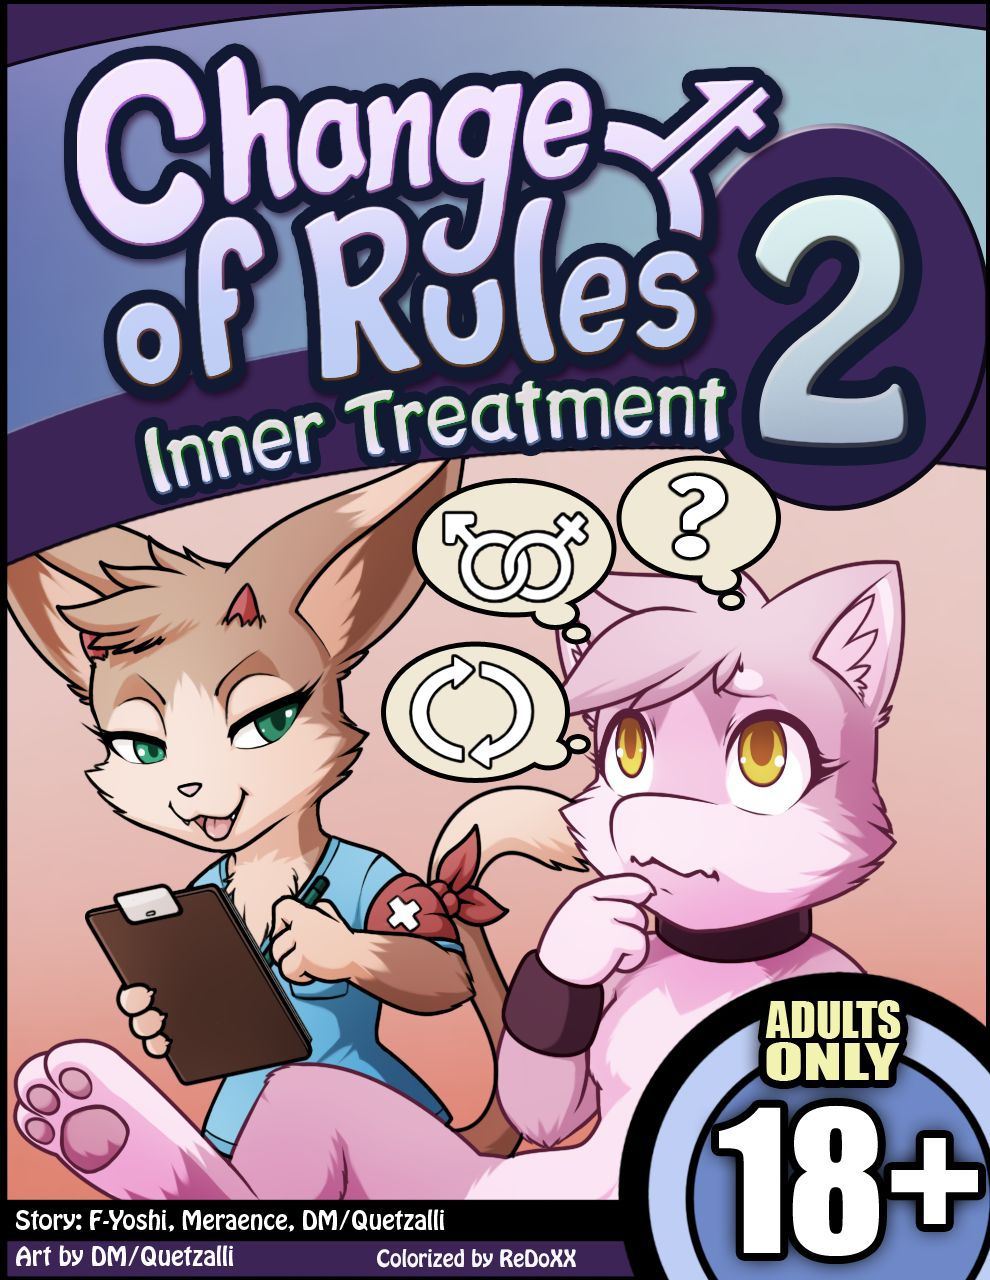 [Darkmirage] Change of Rules 2: Inner Treatment [Colorized][ReDoXX] 1